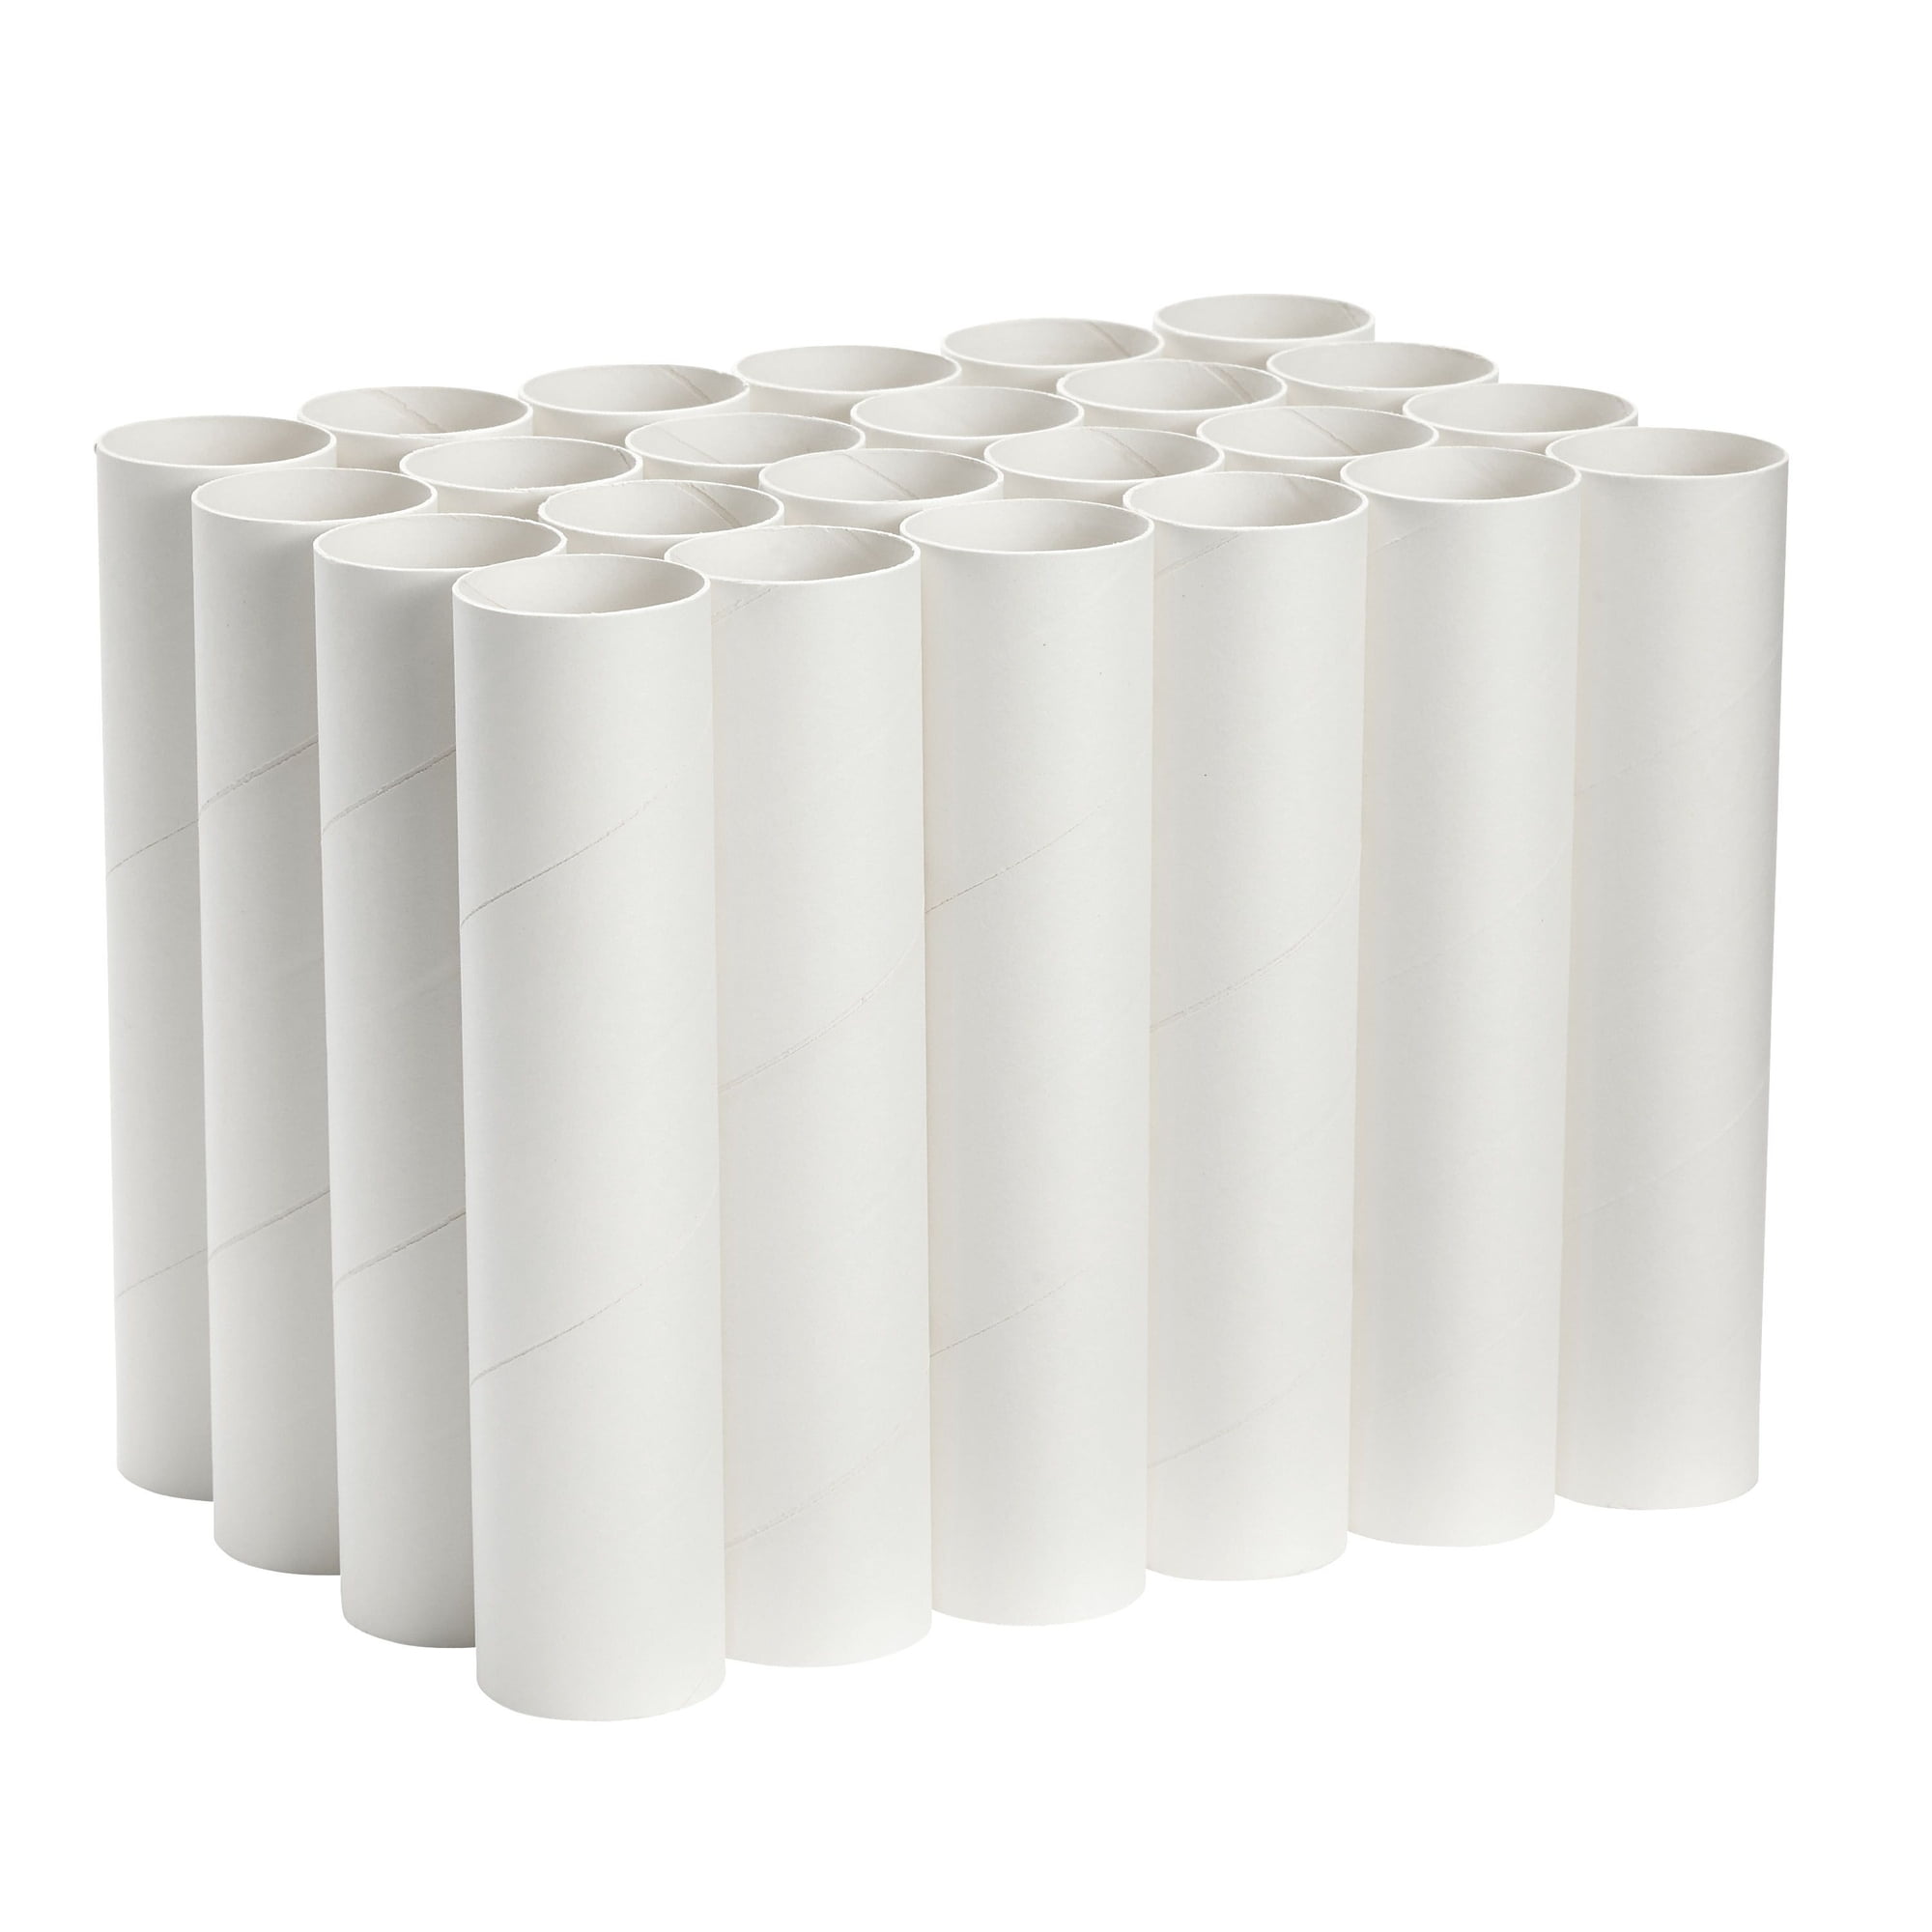 Find Wholesale White Cardboard in Roll Supplies To Order Online 